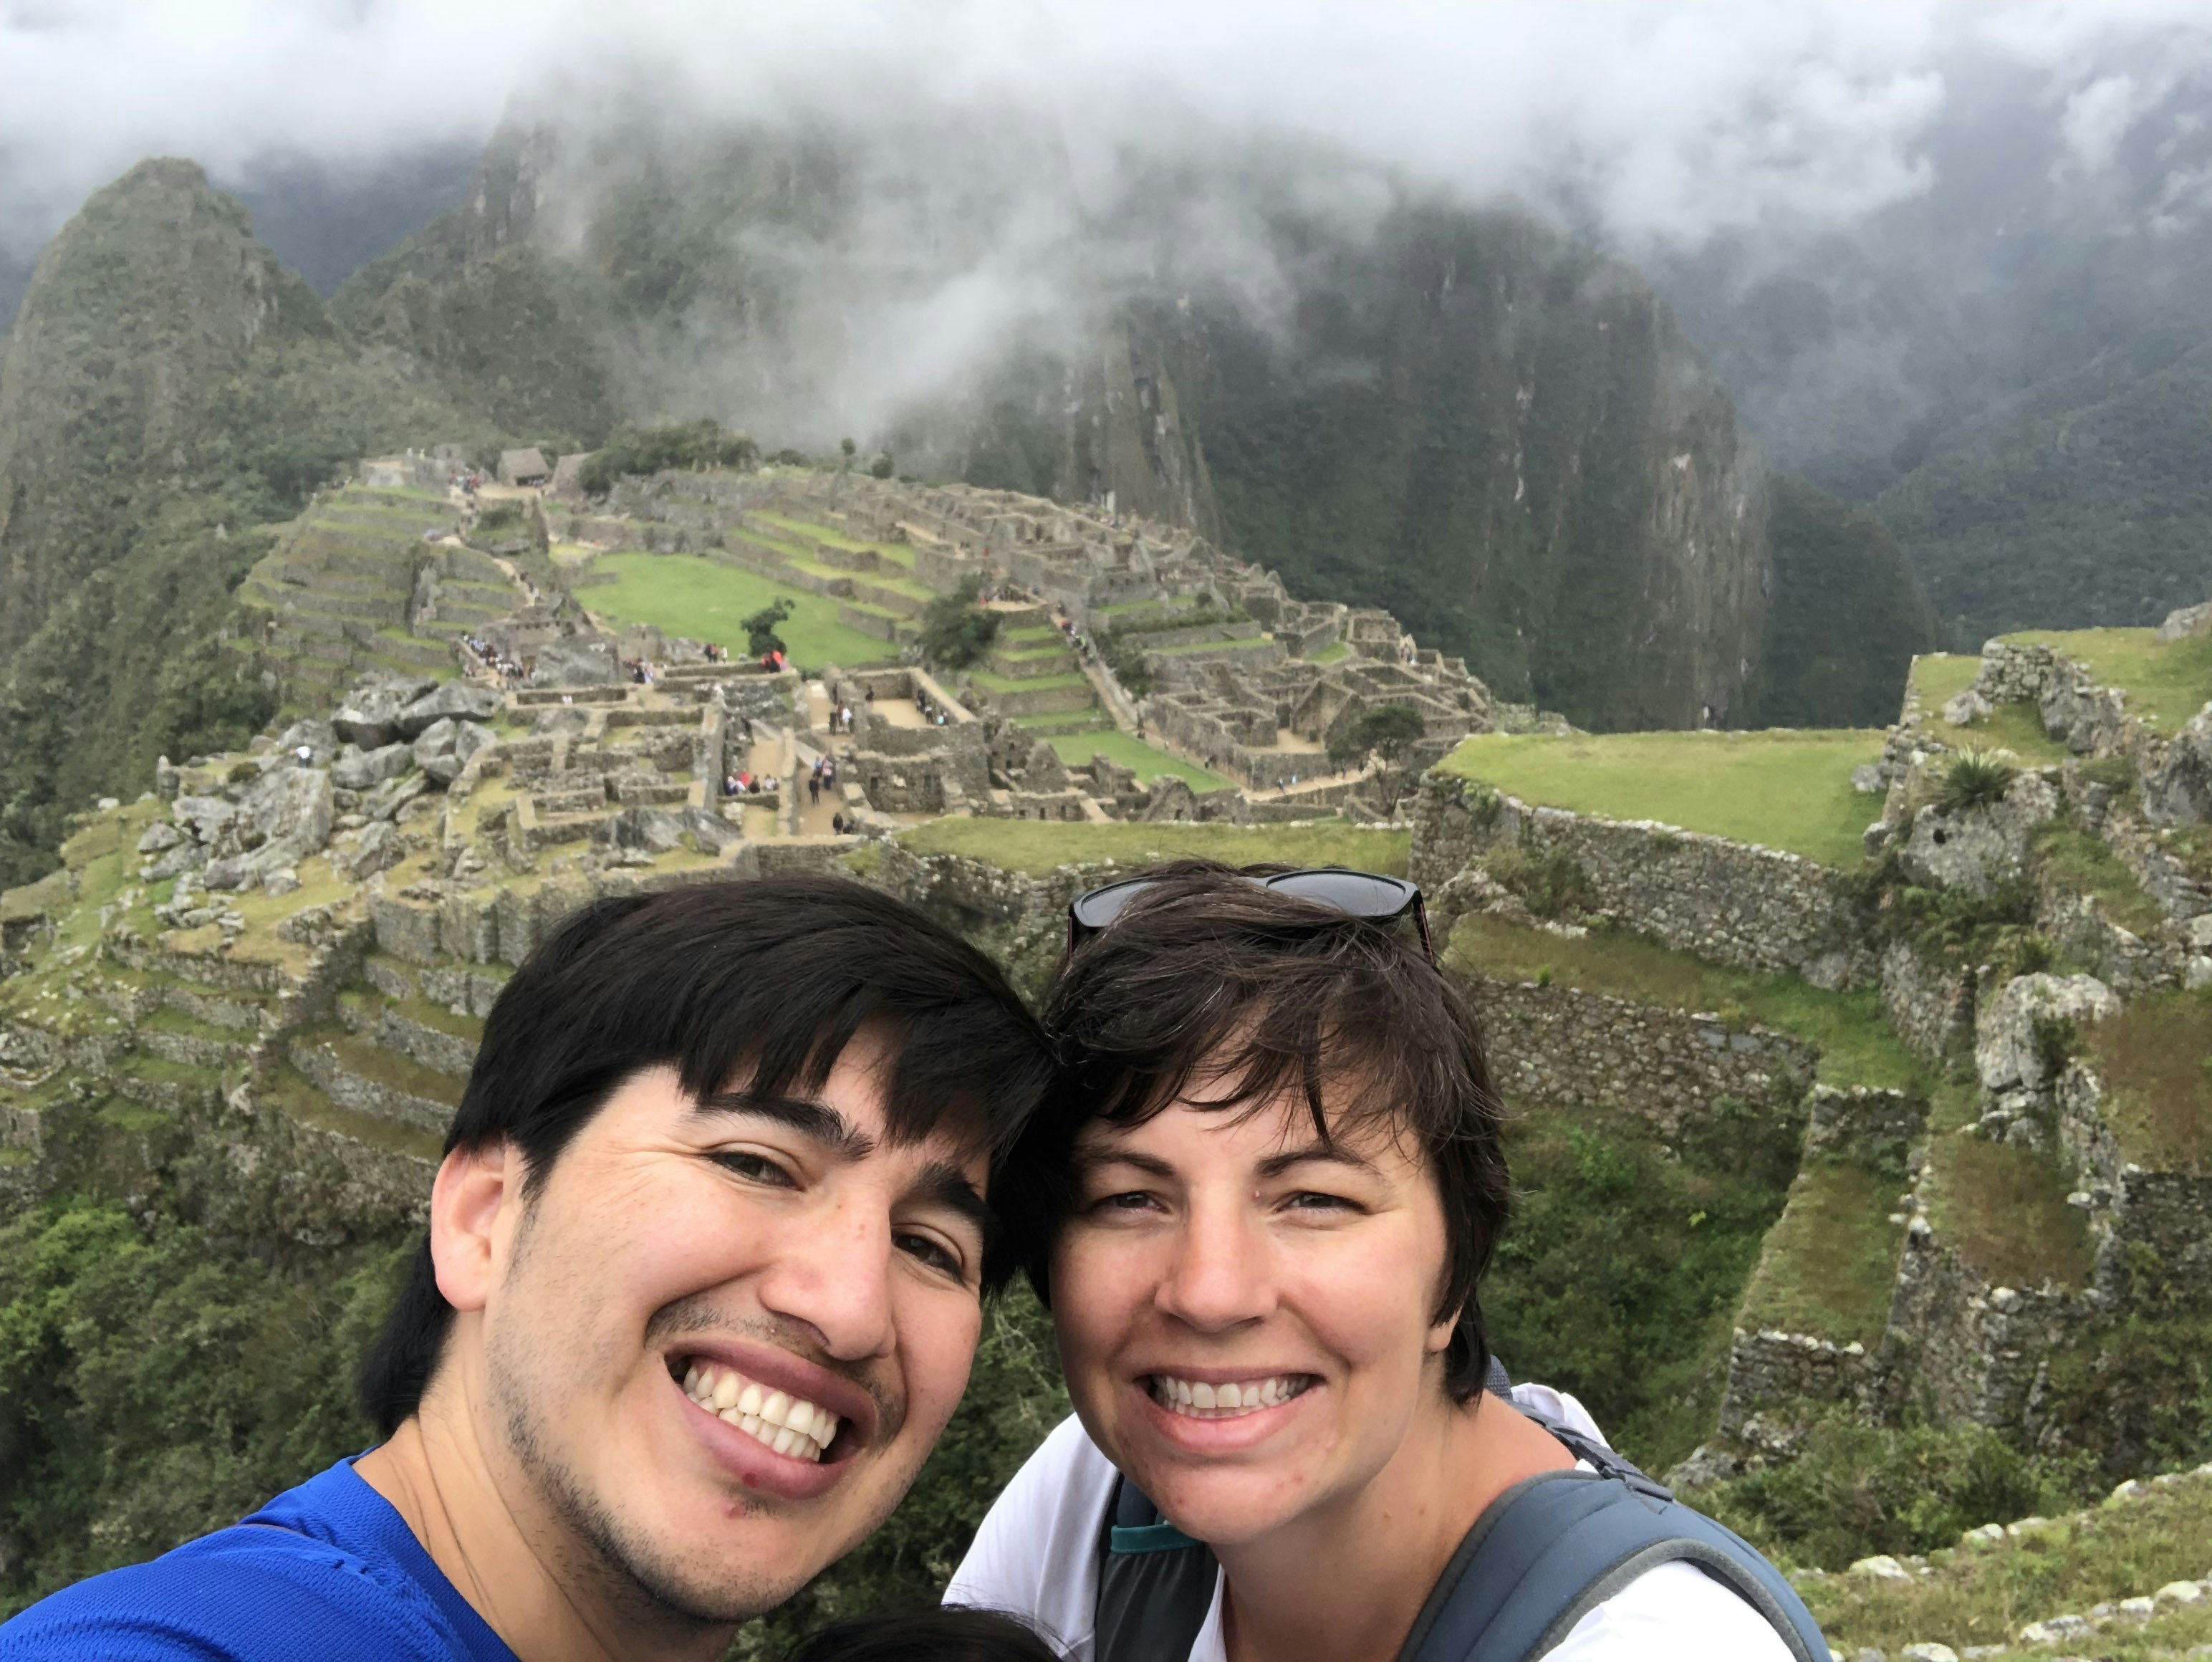 A man and a woman pose for the camera with the Inca ruins of Machu Picchu in the background.